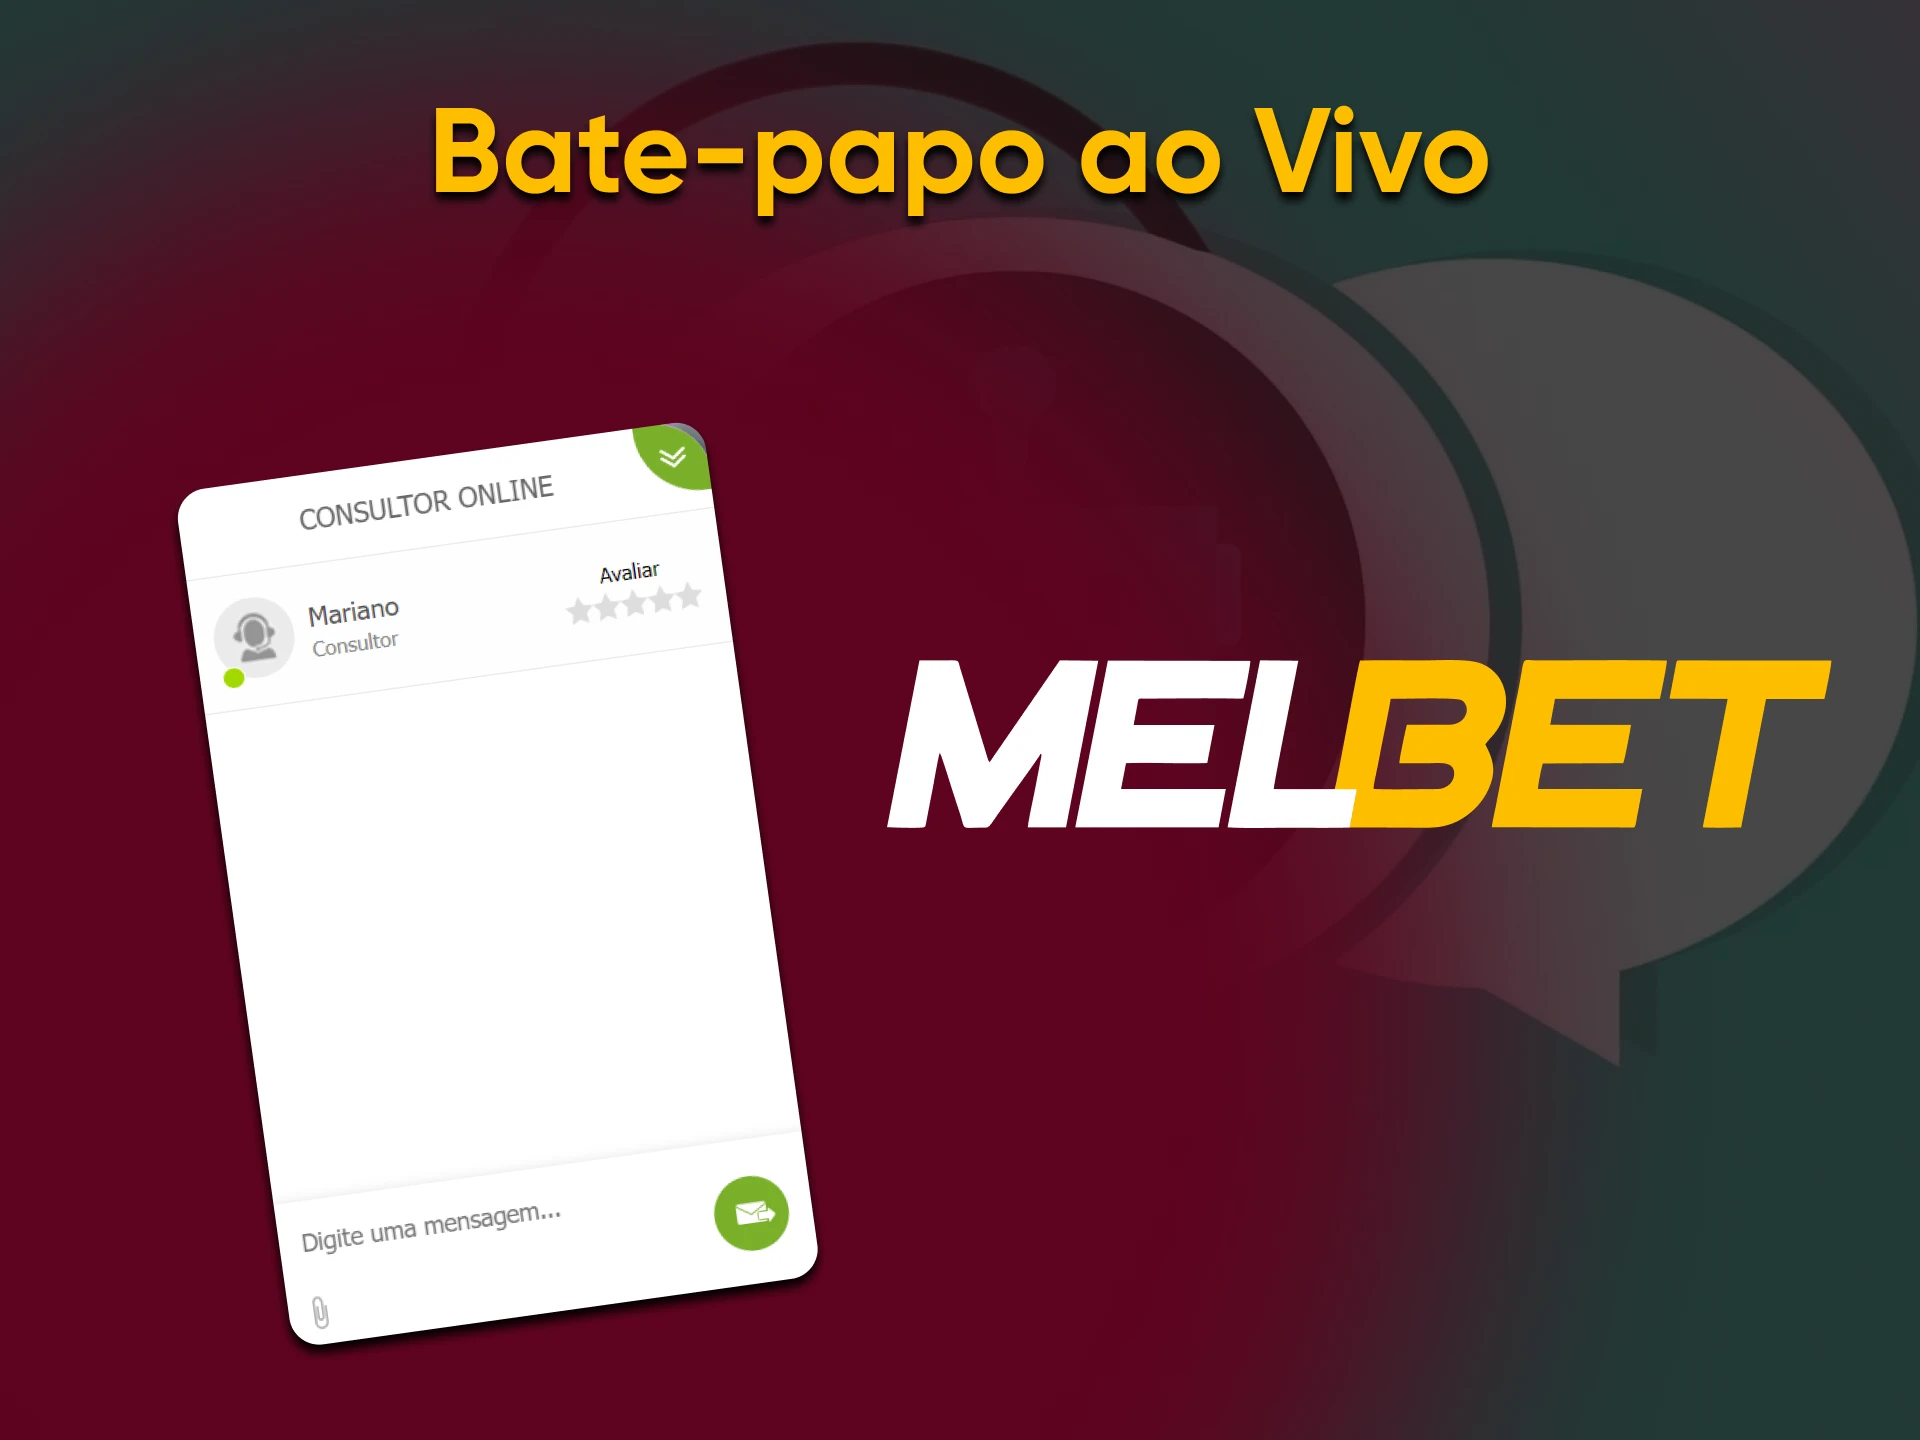 If you have any questions, you can write to Melbet live chat immediately.